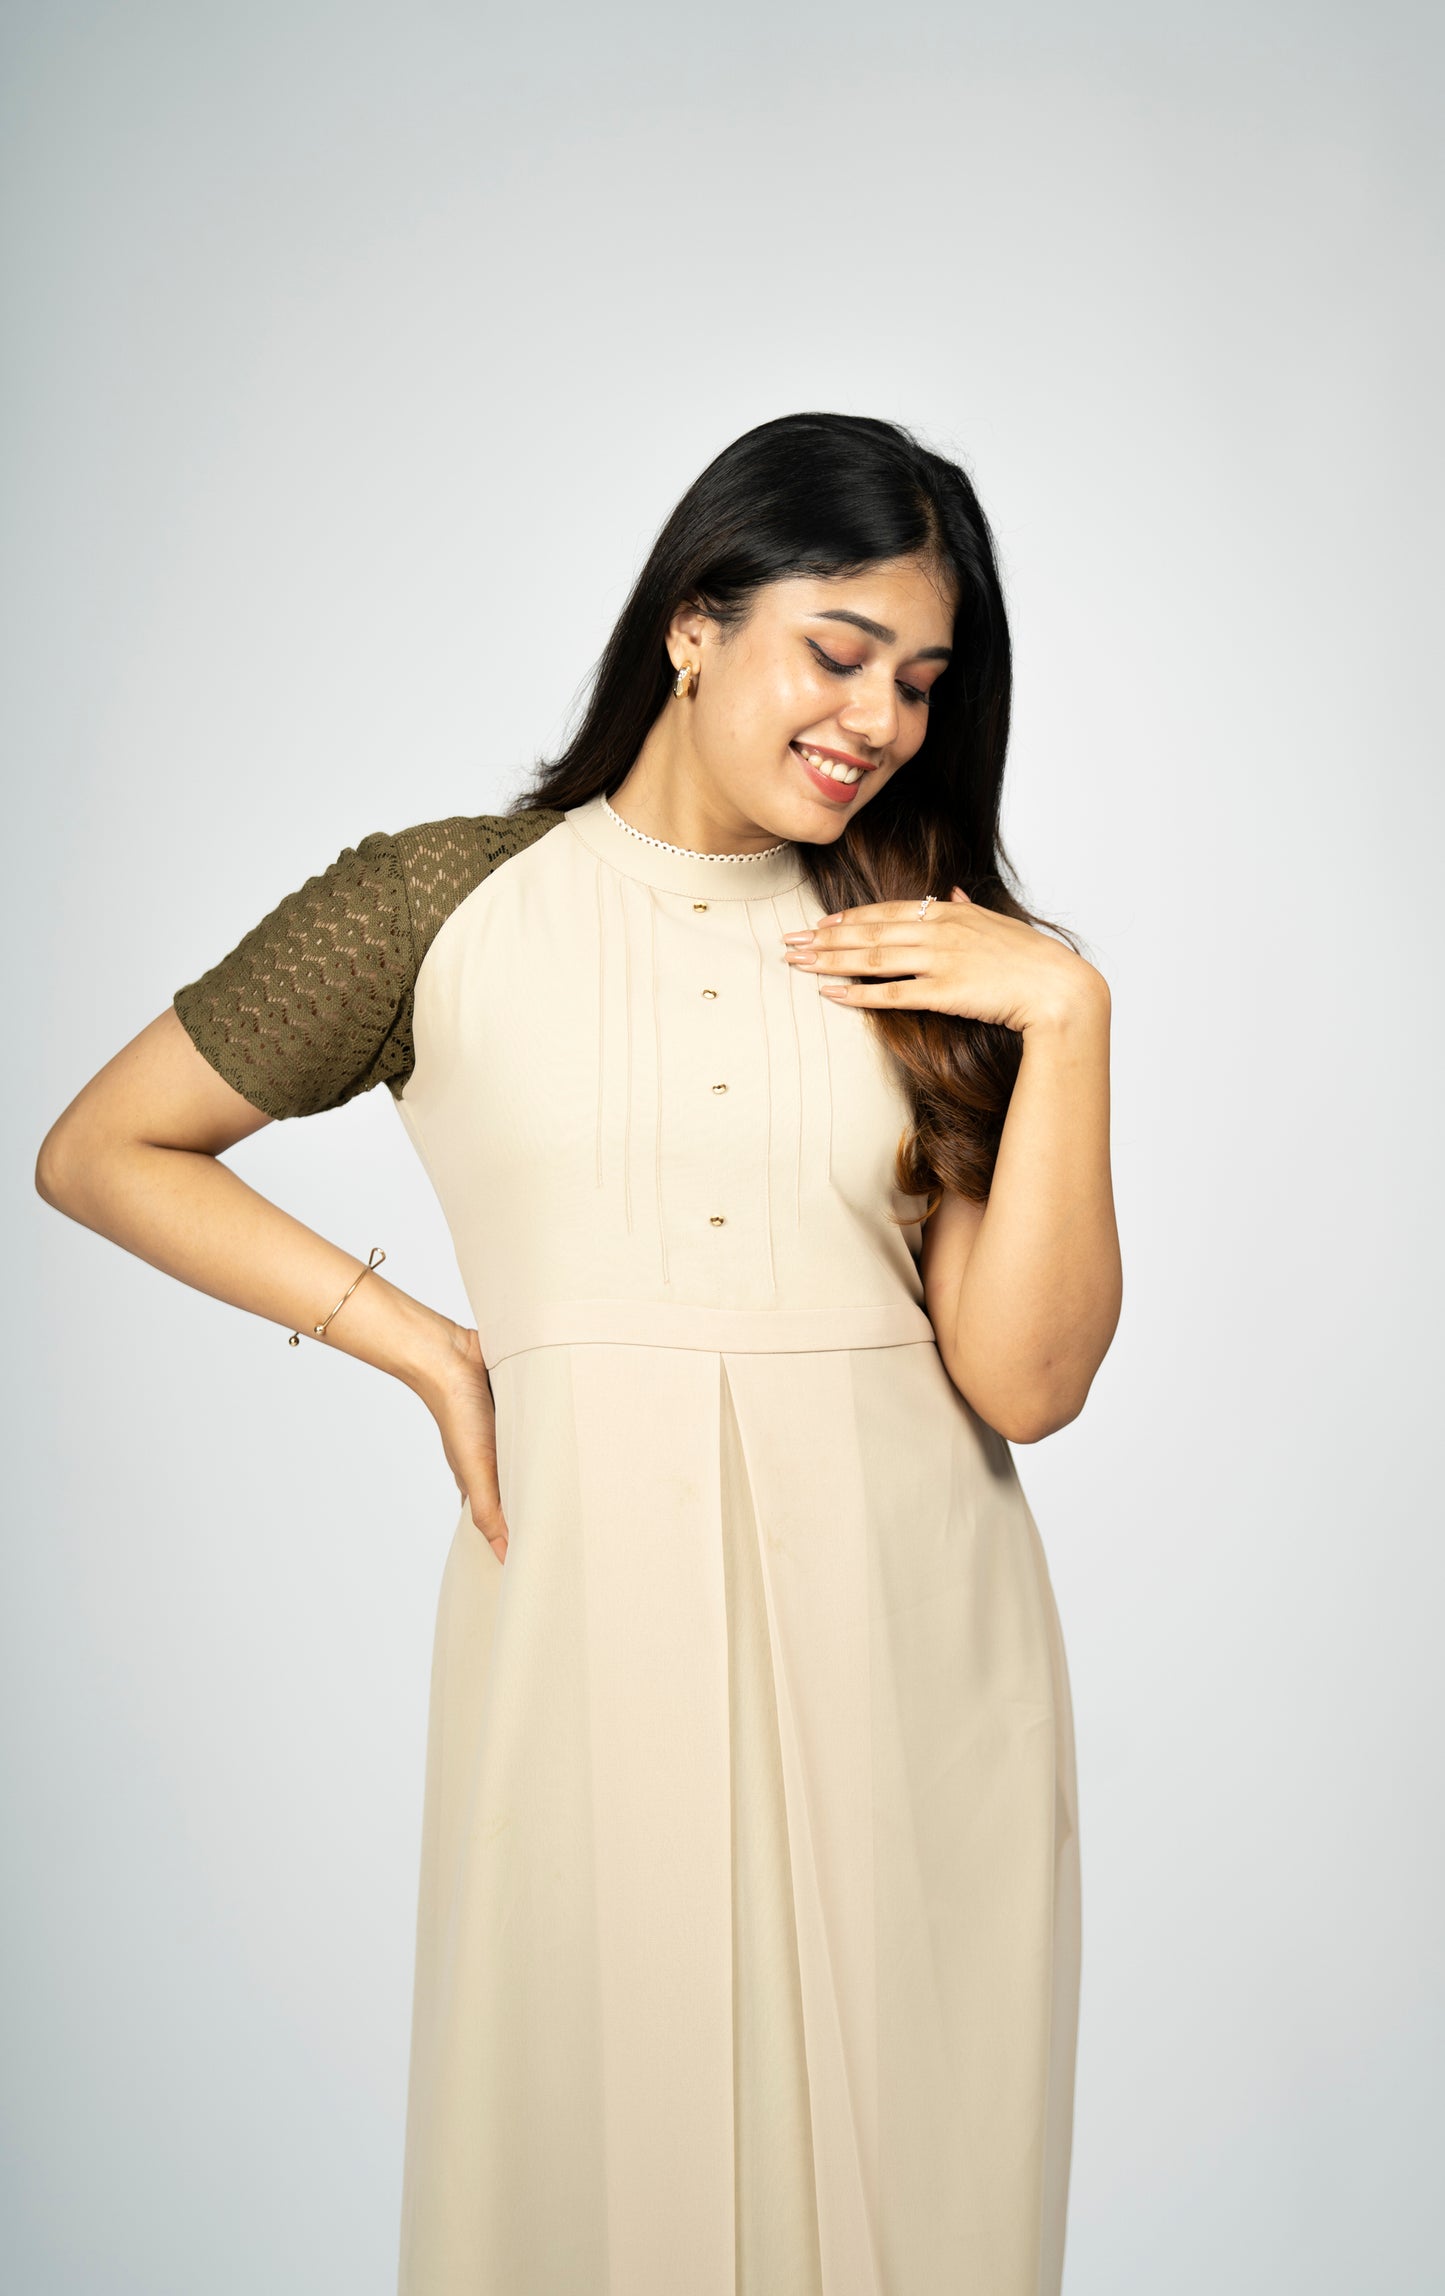 Western georgette dress/kurti in creamish beige shade highlighted with deep olive green lace fabric MBS-R134